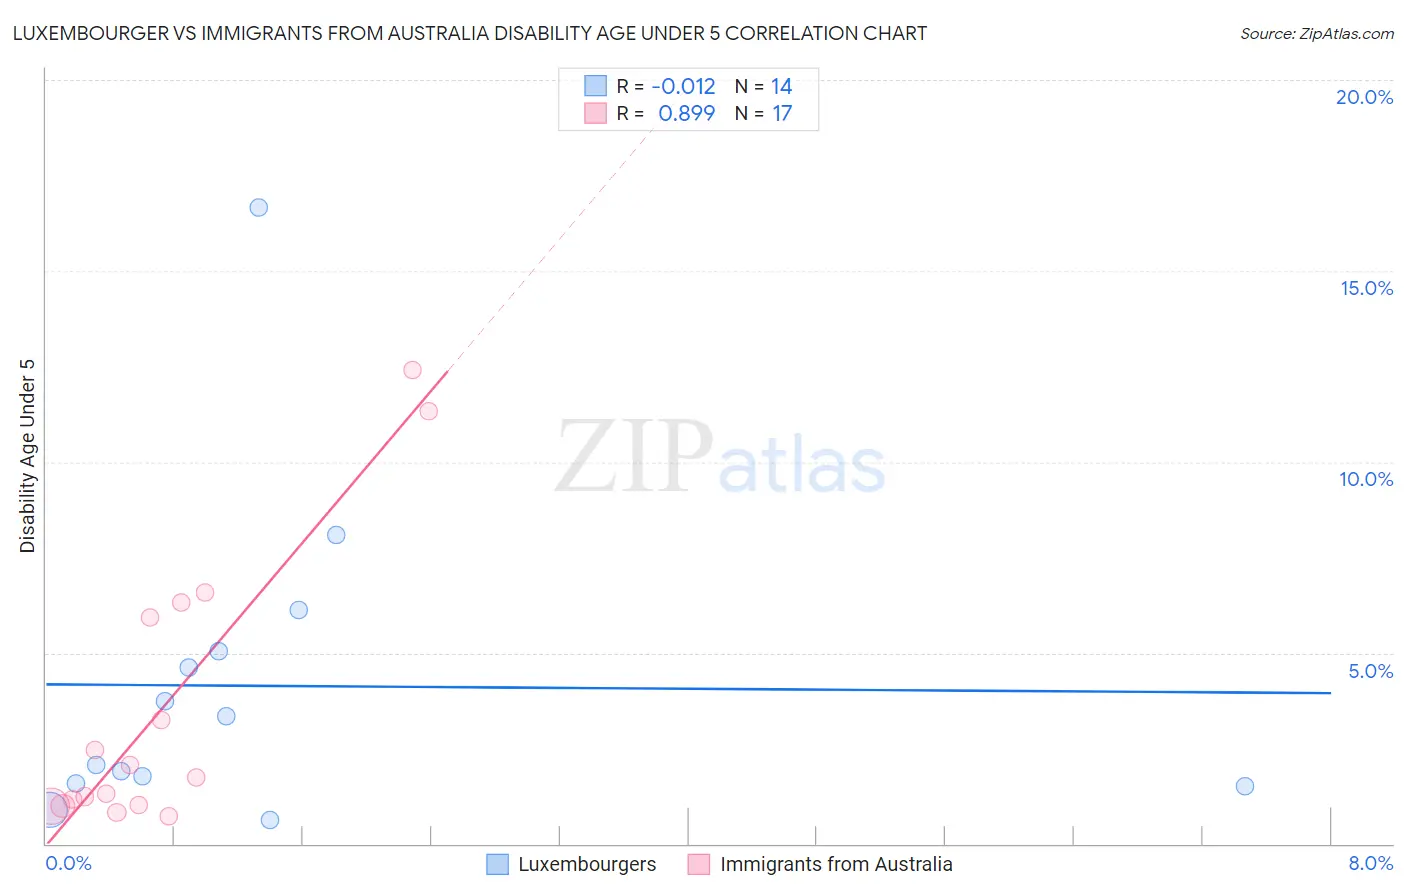 Luxembourger vs Immigrants from Australia Disability Age Under 5